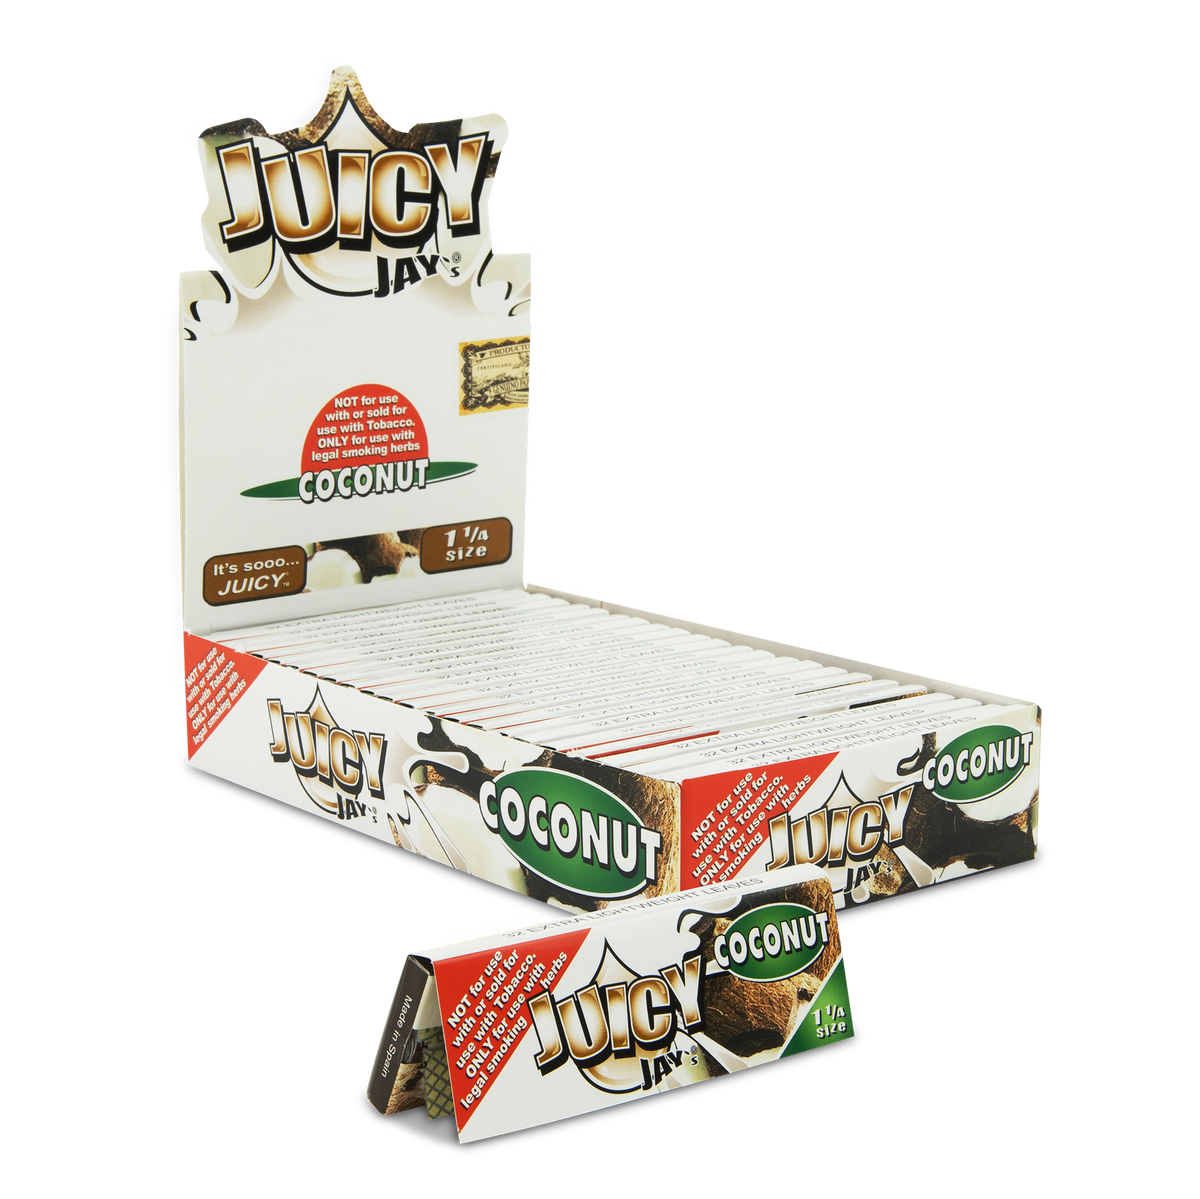 Juicy Jays 1 1/4 Coconut Flavored Hemp Rolling Papers Rolling Papers esd-official